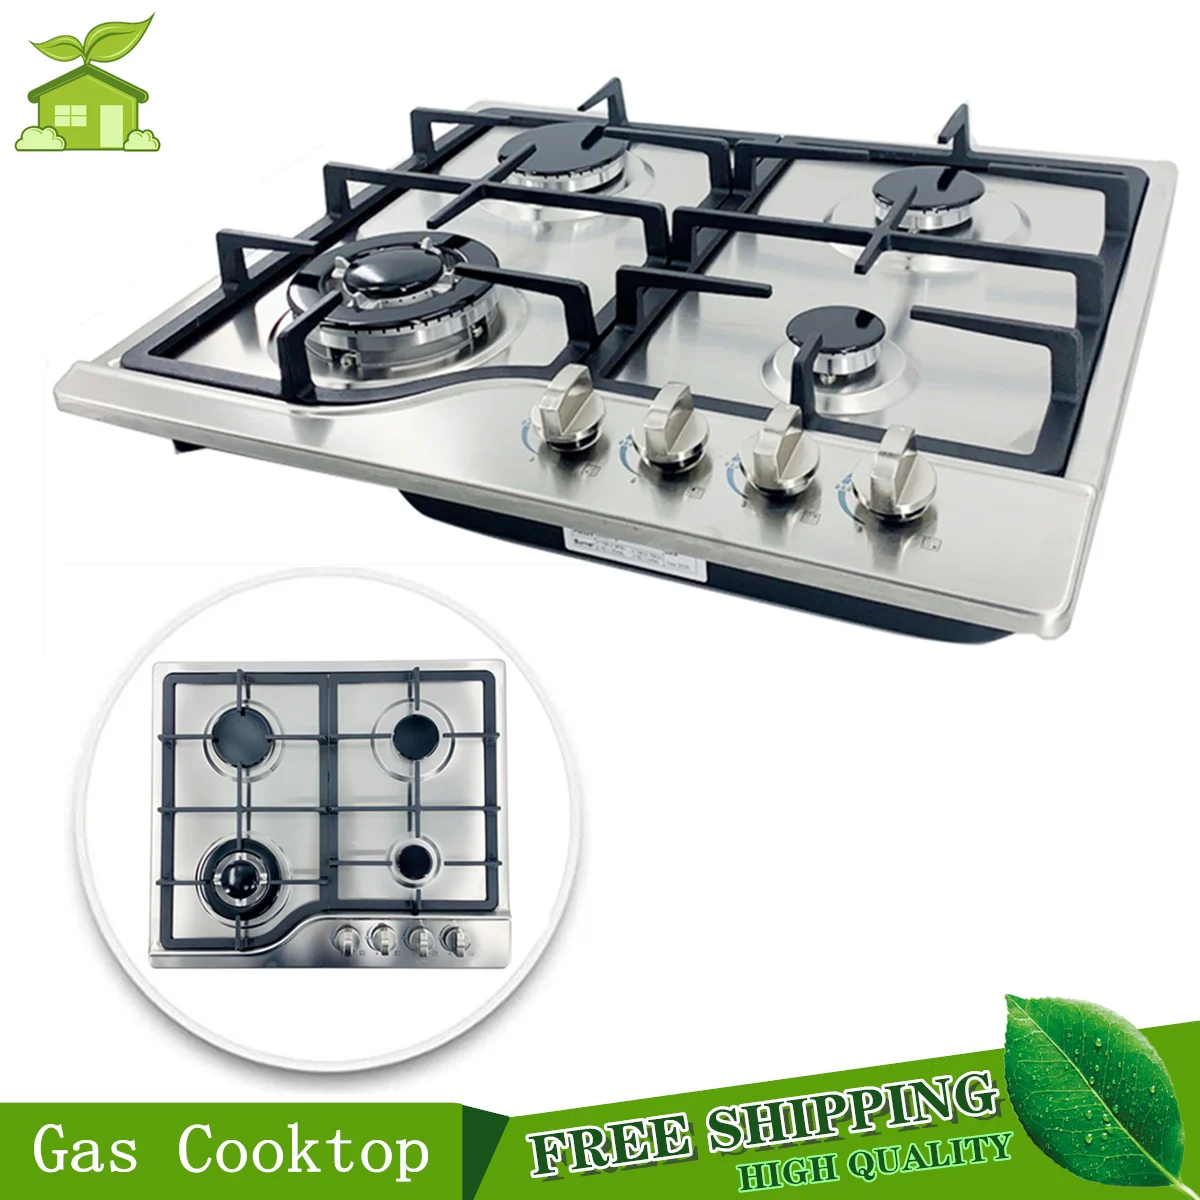 

Natural/Propane Gas Cooktop Built-in 4-Burner Gas Cooktop LPG/LNG Cooker Stainless Steel Kitchen Cooktop Stove Cooking Appliance